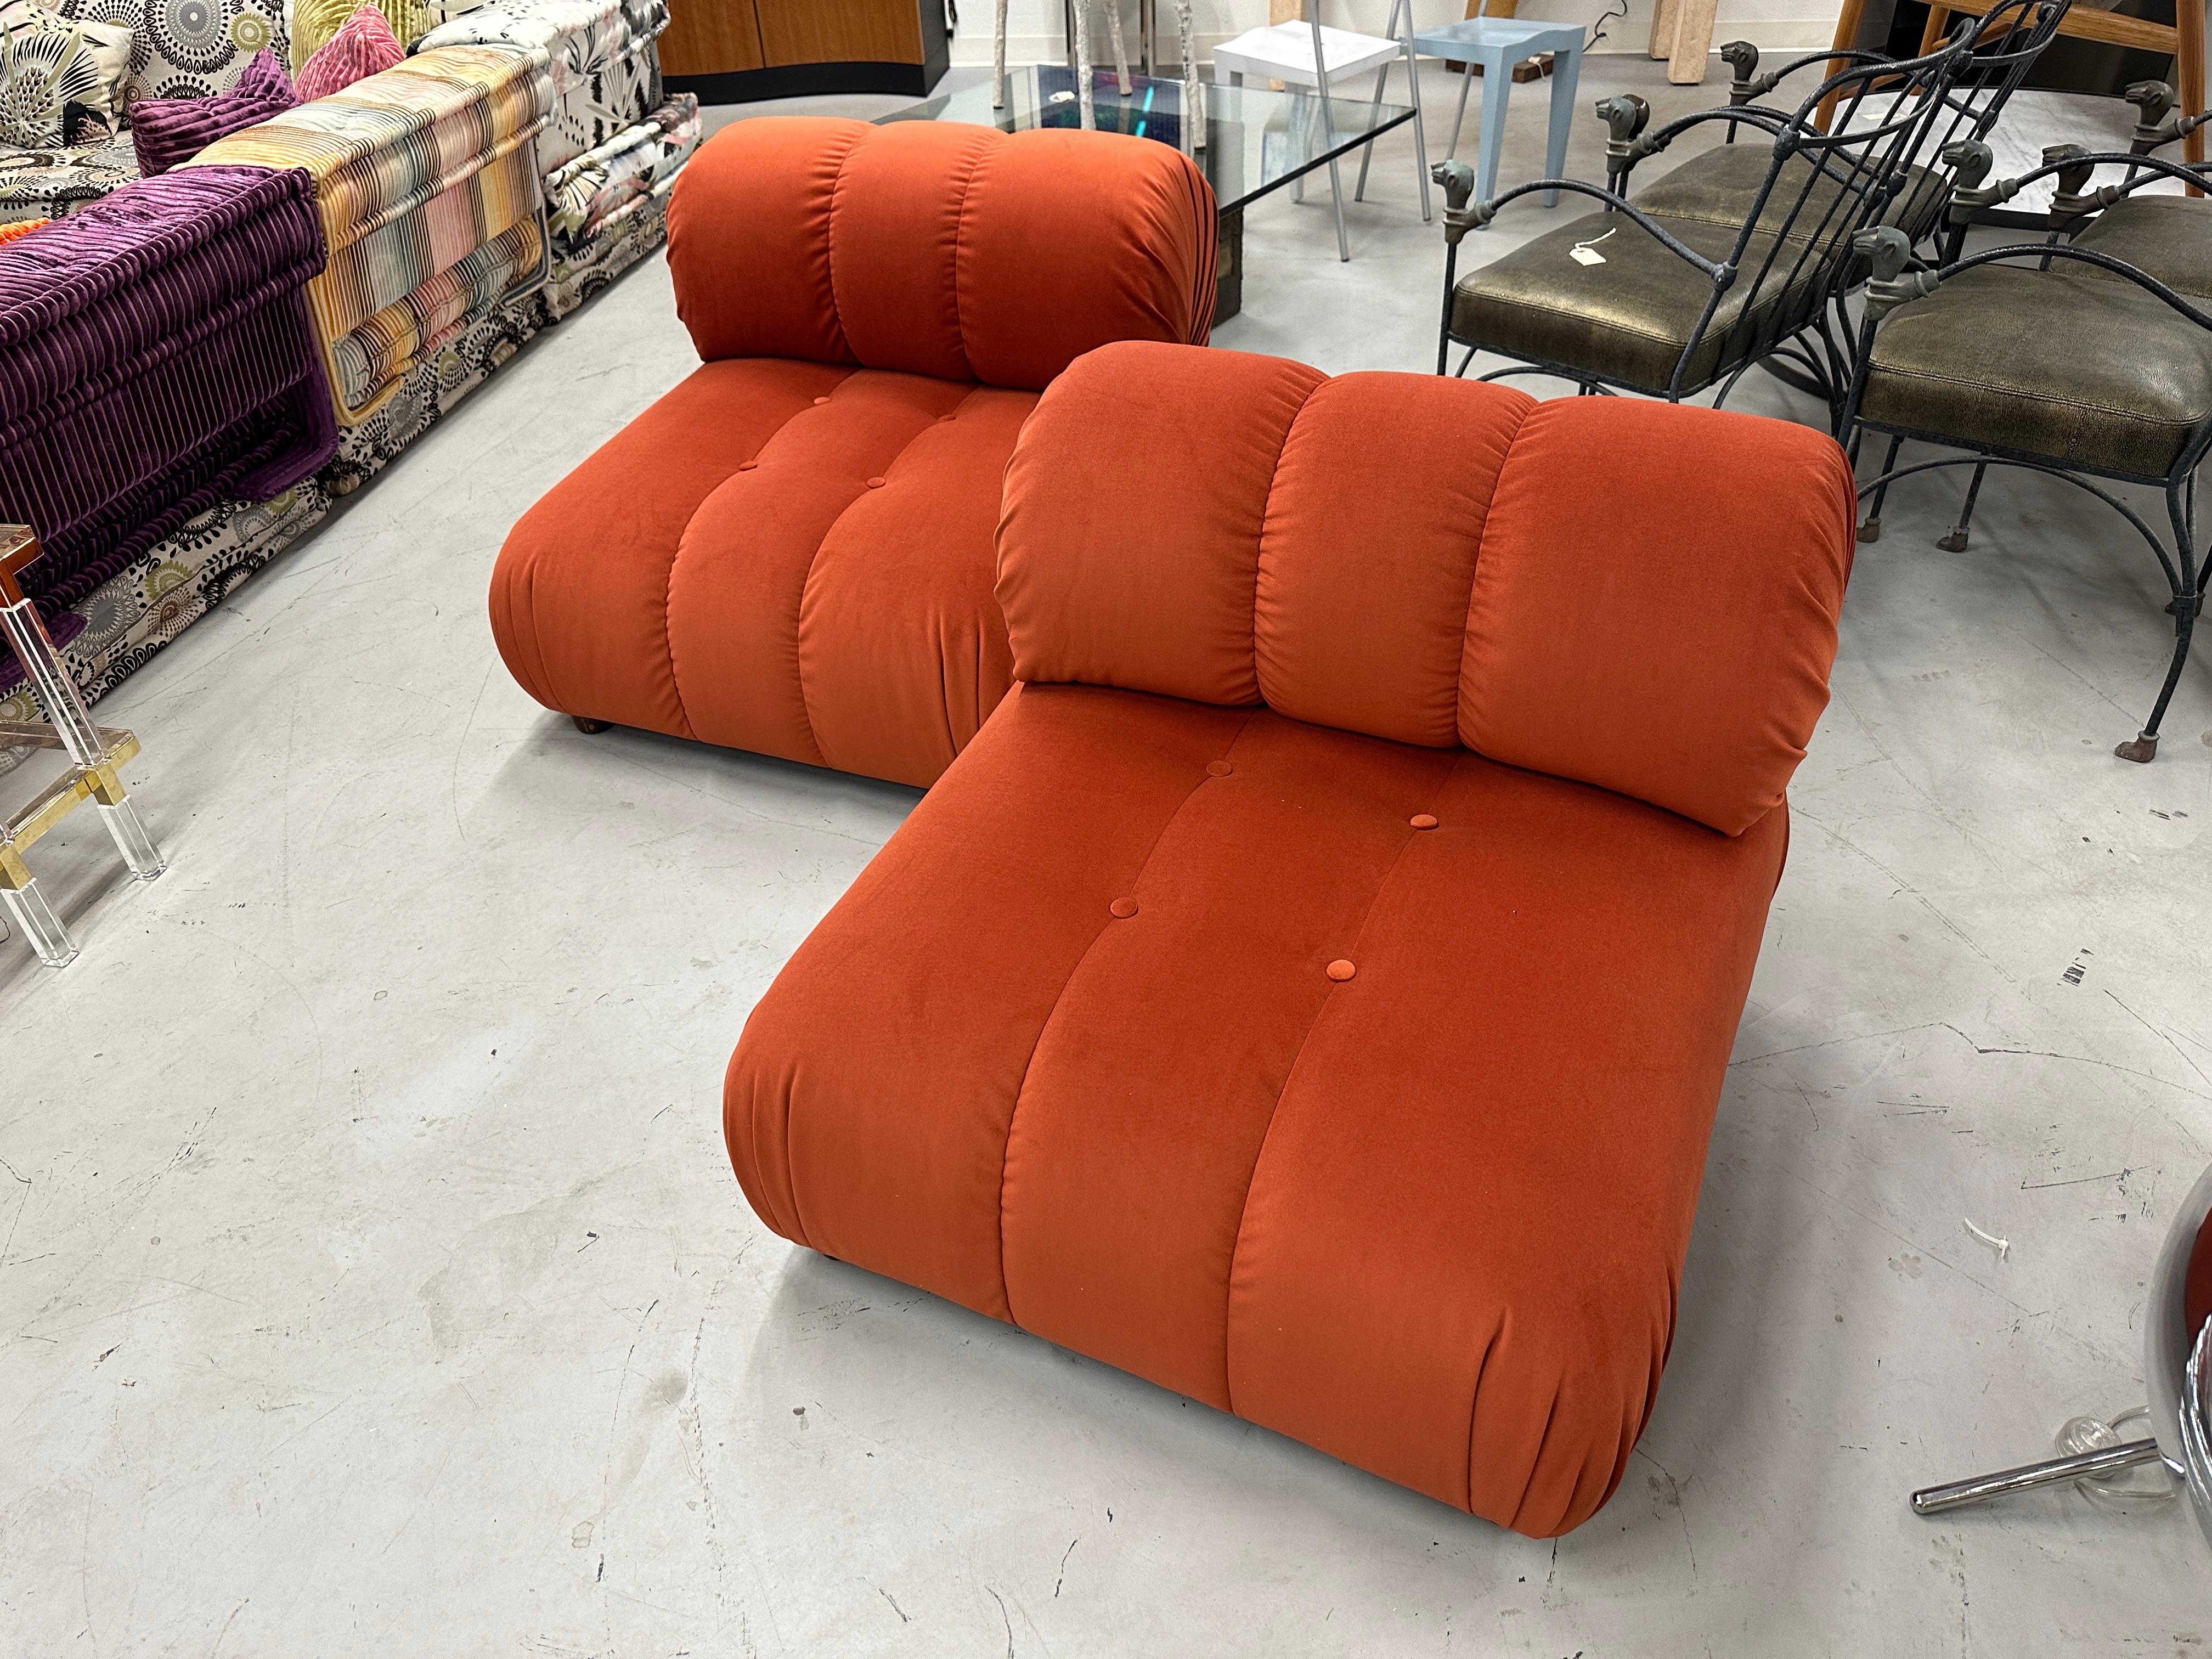 Pair of Reupholstered Orange Velvet Rouched and Tufted Chairs In Good Condition For Sale In Palm Springs, CA